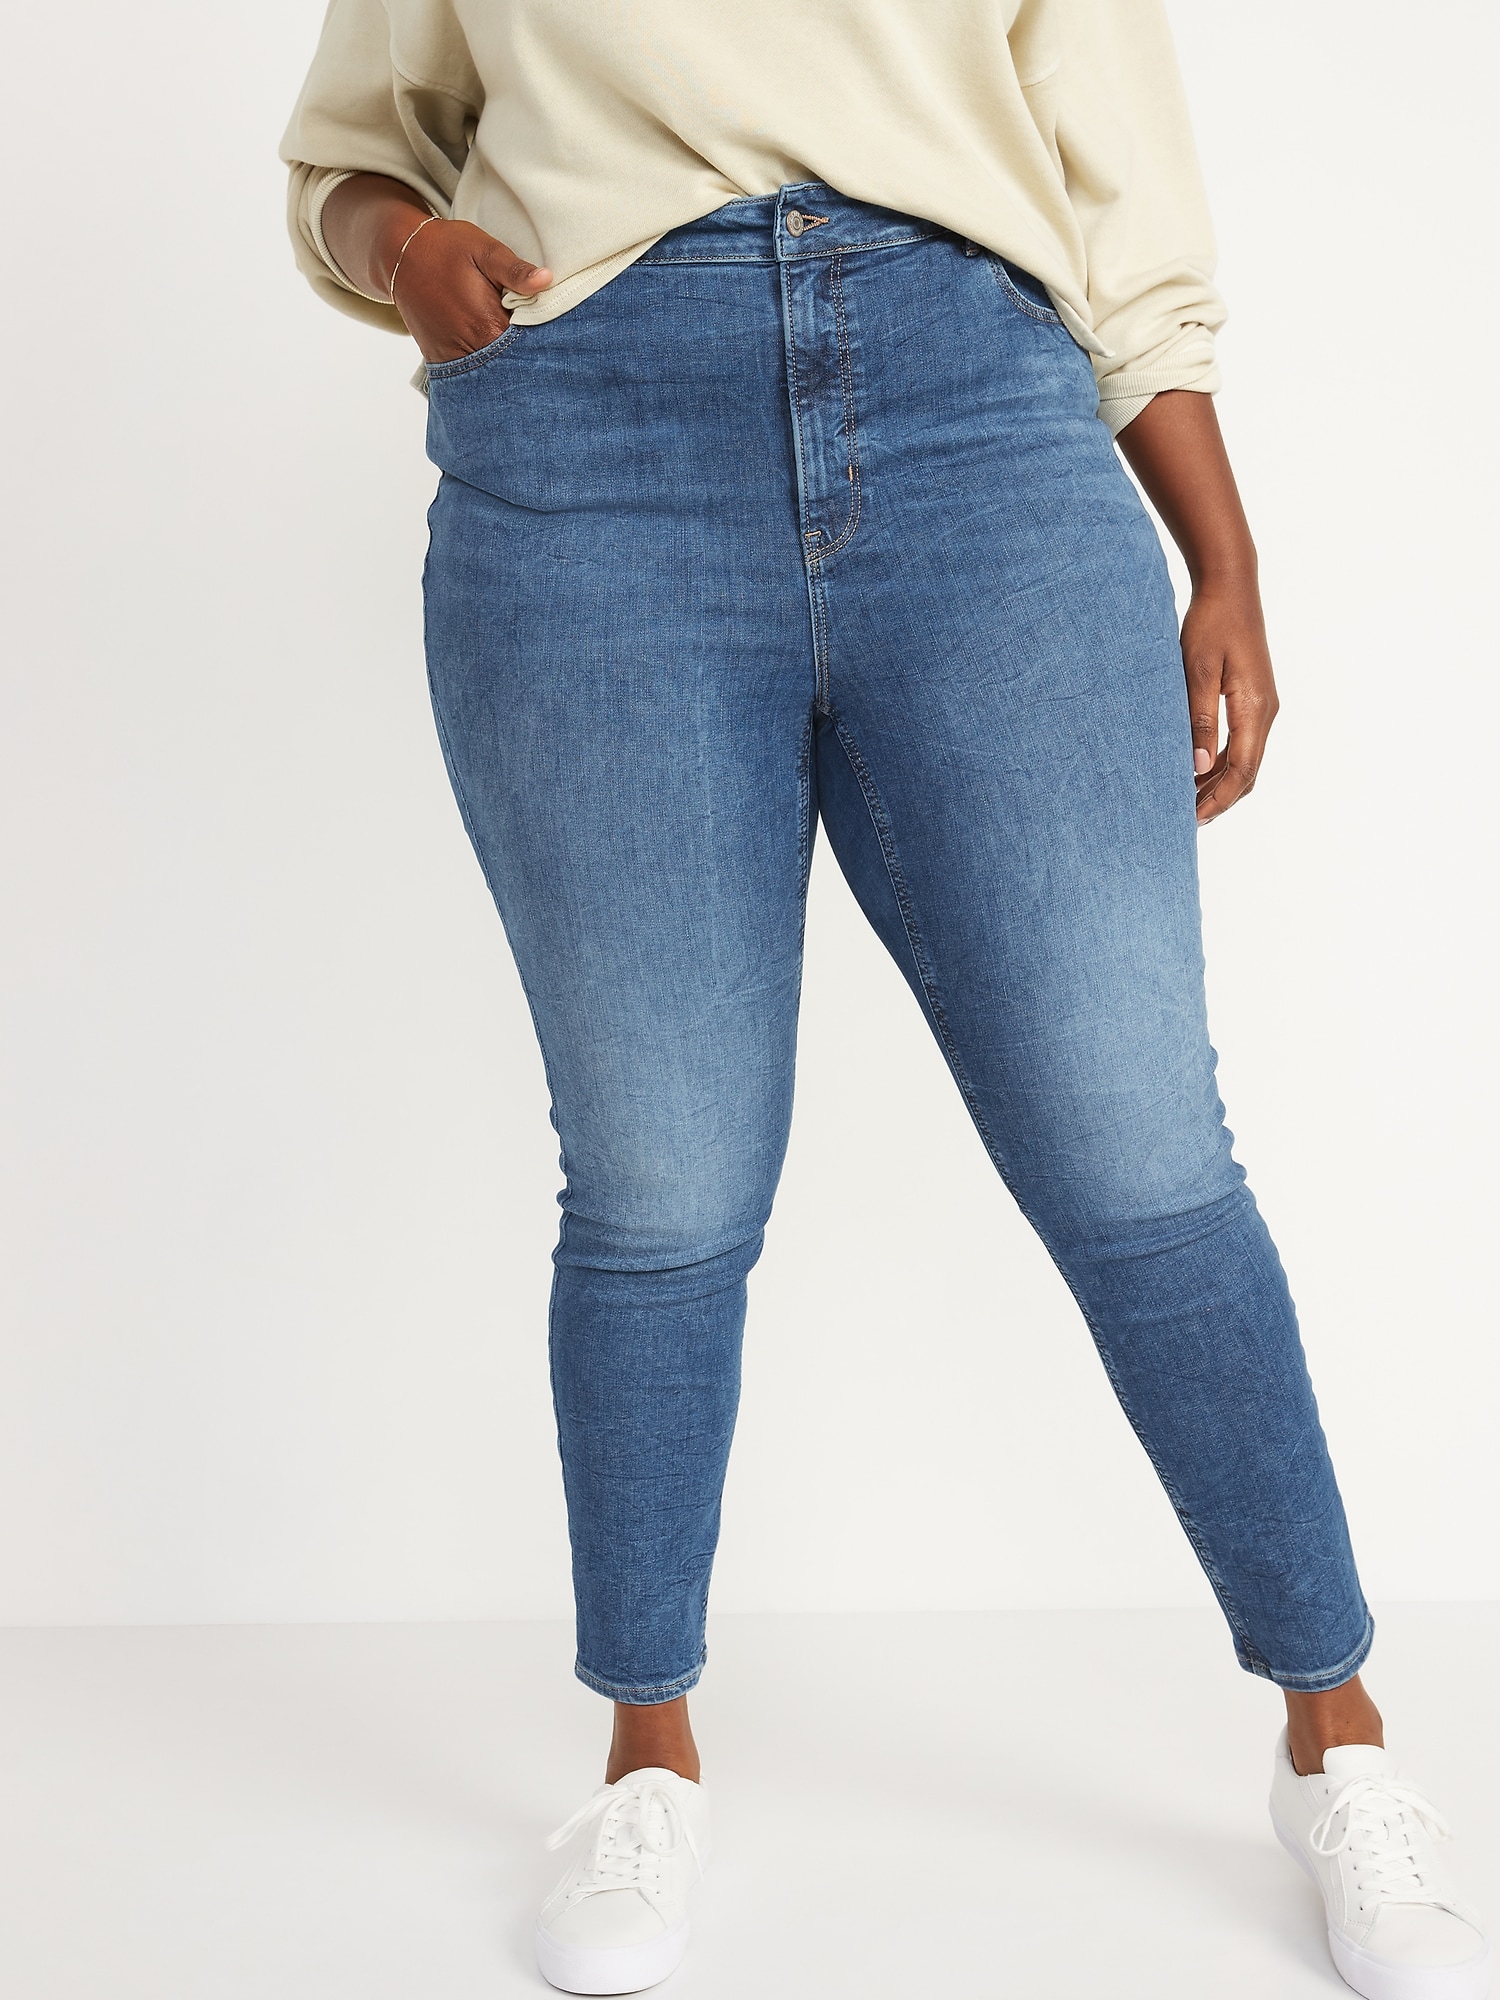 3-Sizes-in-1 Extra High-Waisted Rockstar Super-Skinny for Women | Old Navy